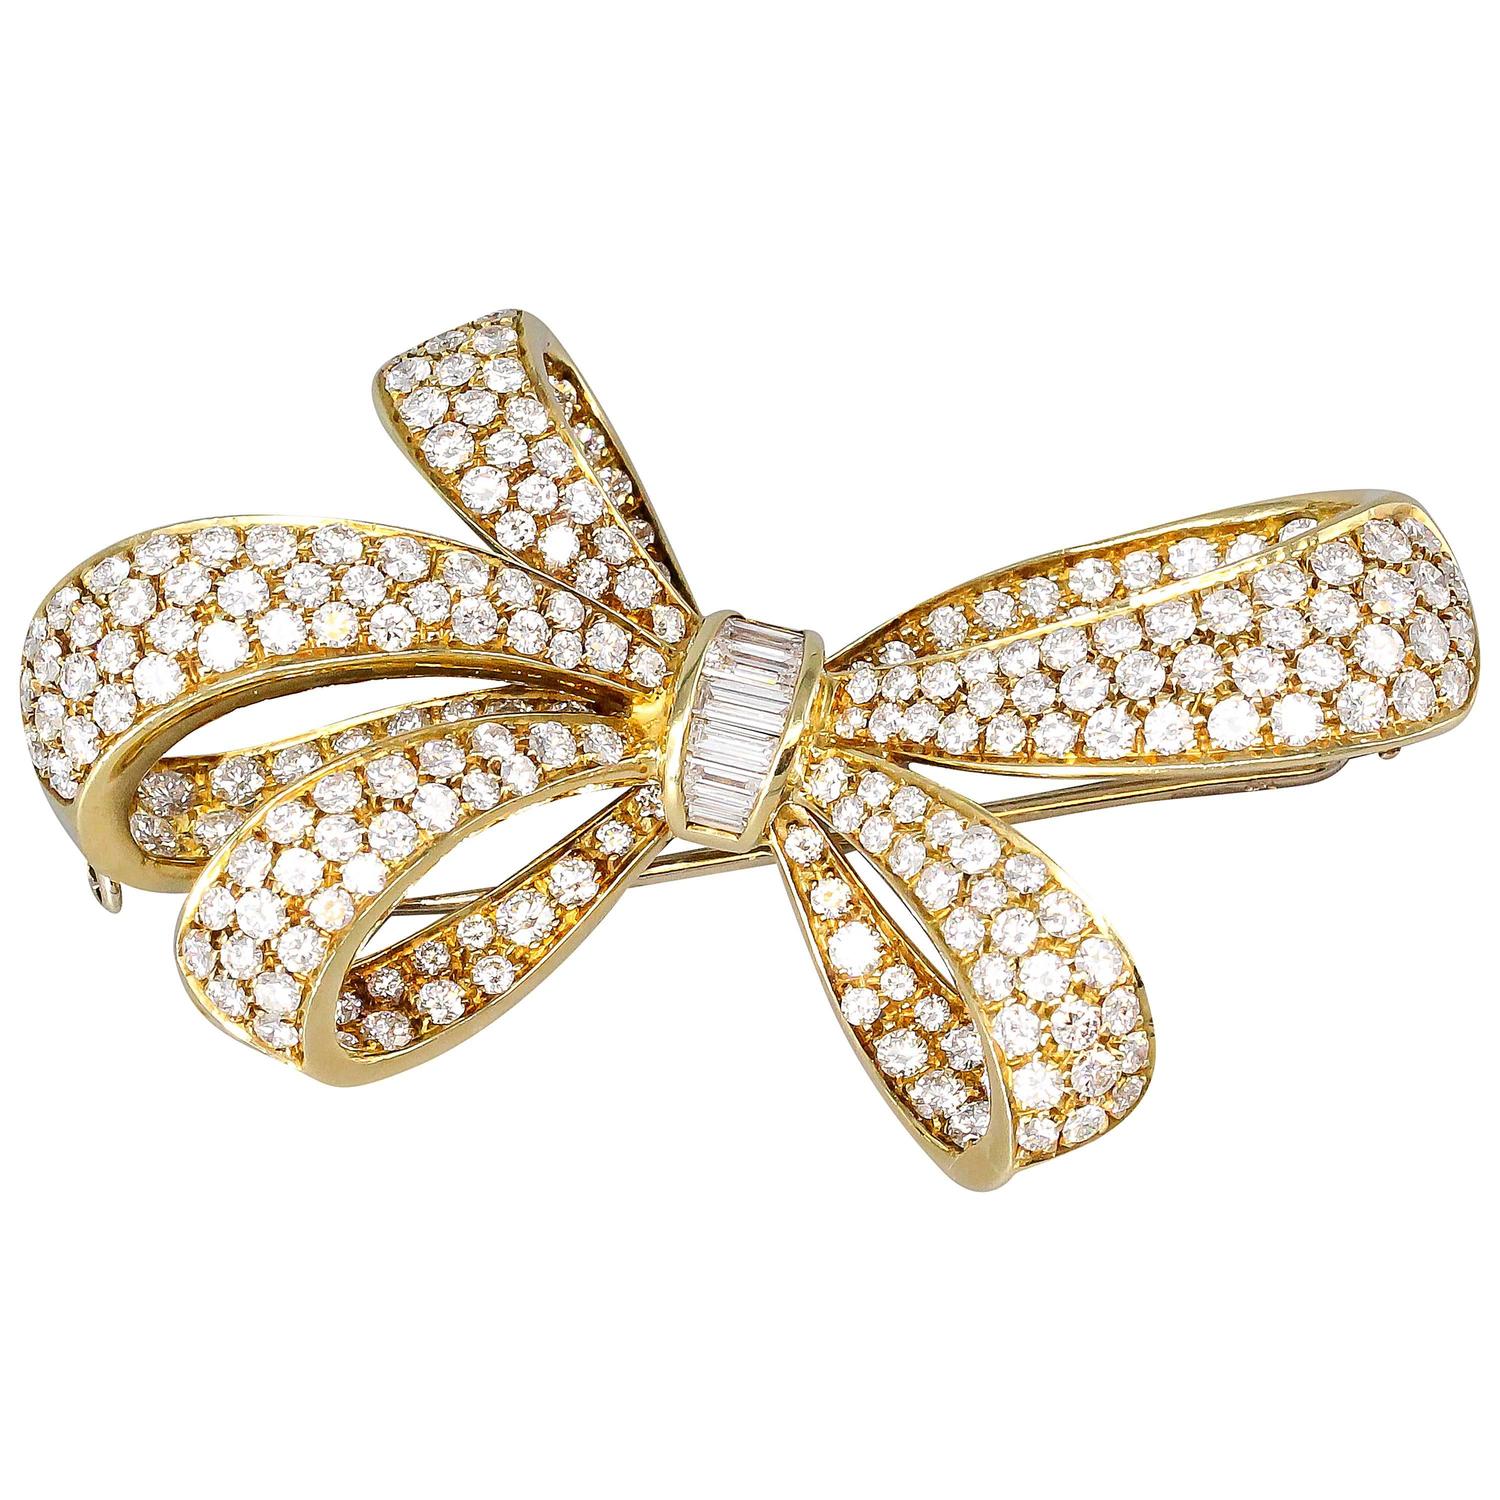 TIFFANY and CO. Diamond and Gold Bow Brooch For Sale at 1stdibs